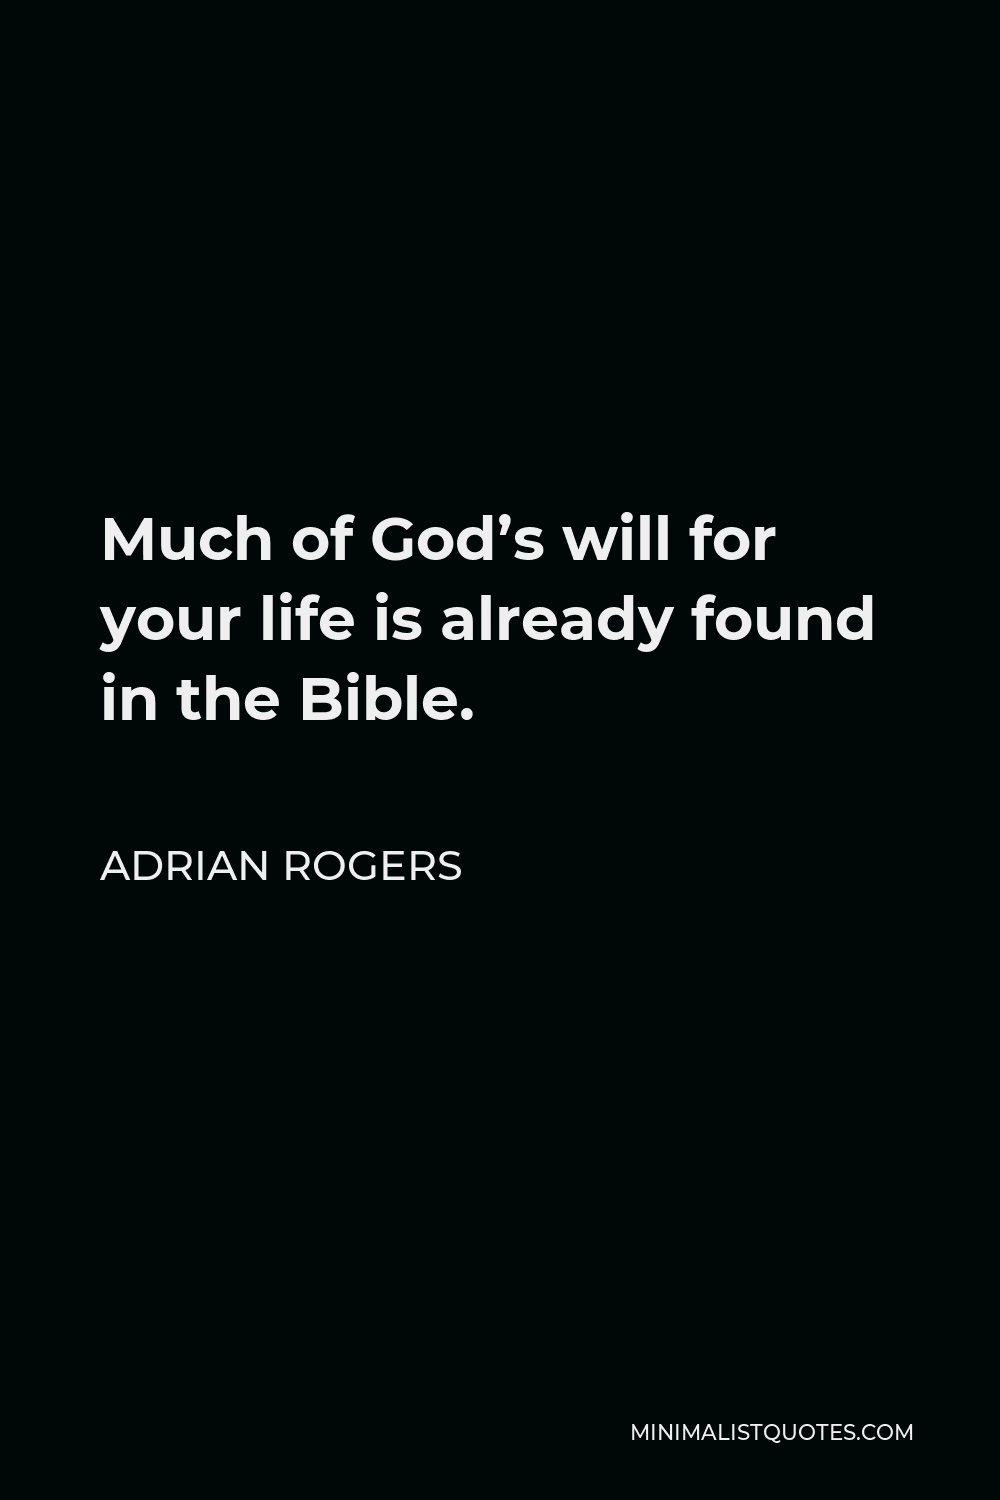 Adrian Rogers Quote - Much of God’s will for your life is already found in the Bible.